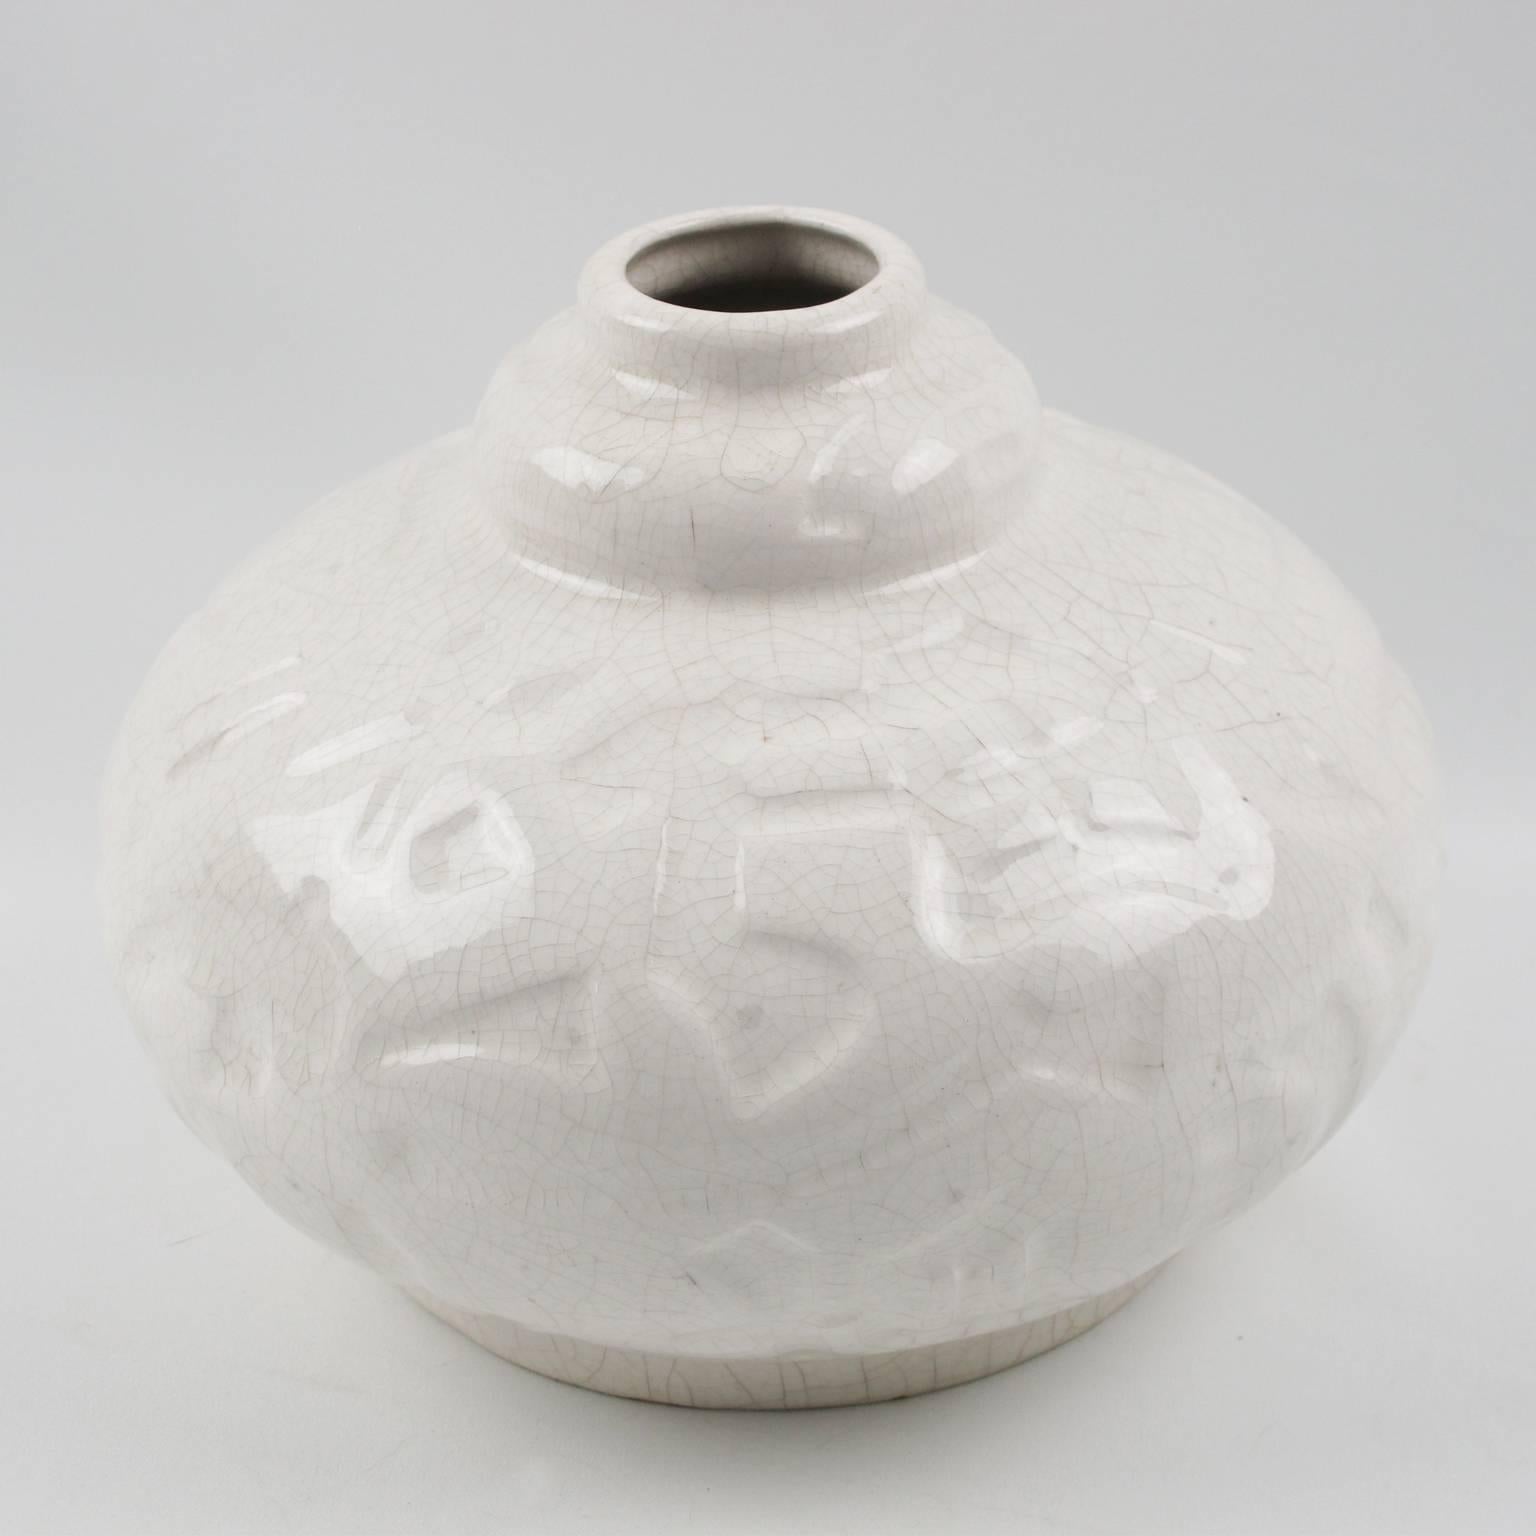 Impressive Art Deco vase by Saint-Clement, France. Lovely ceramic vase with white crackle glaze finish, featuring a large puffy round shape with small collar opening and detailed carved stylized geometric design all around. No marking